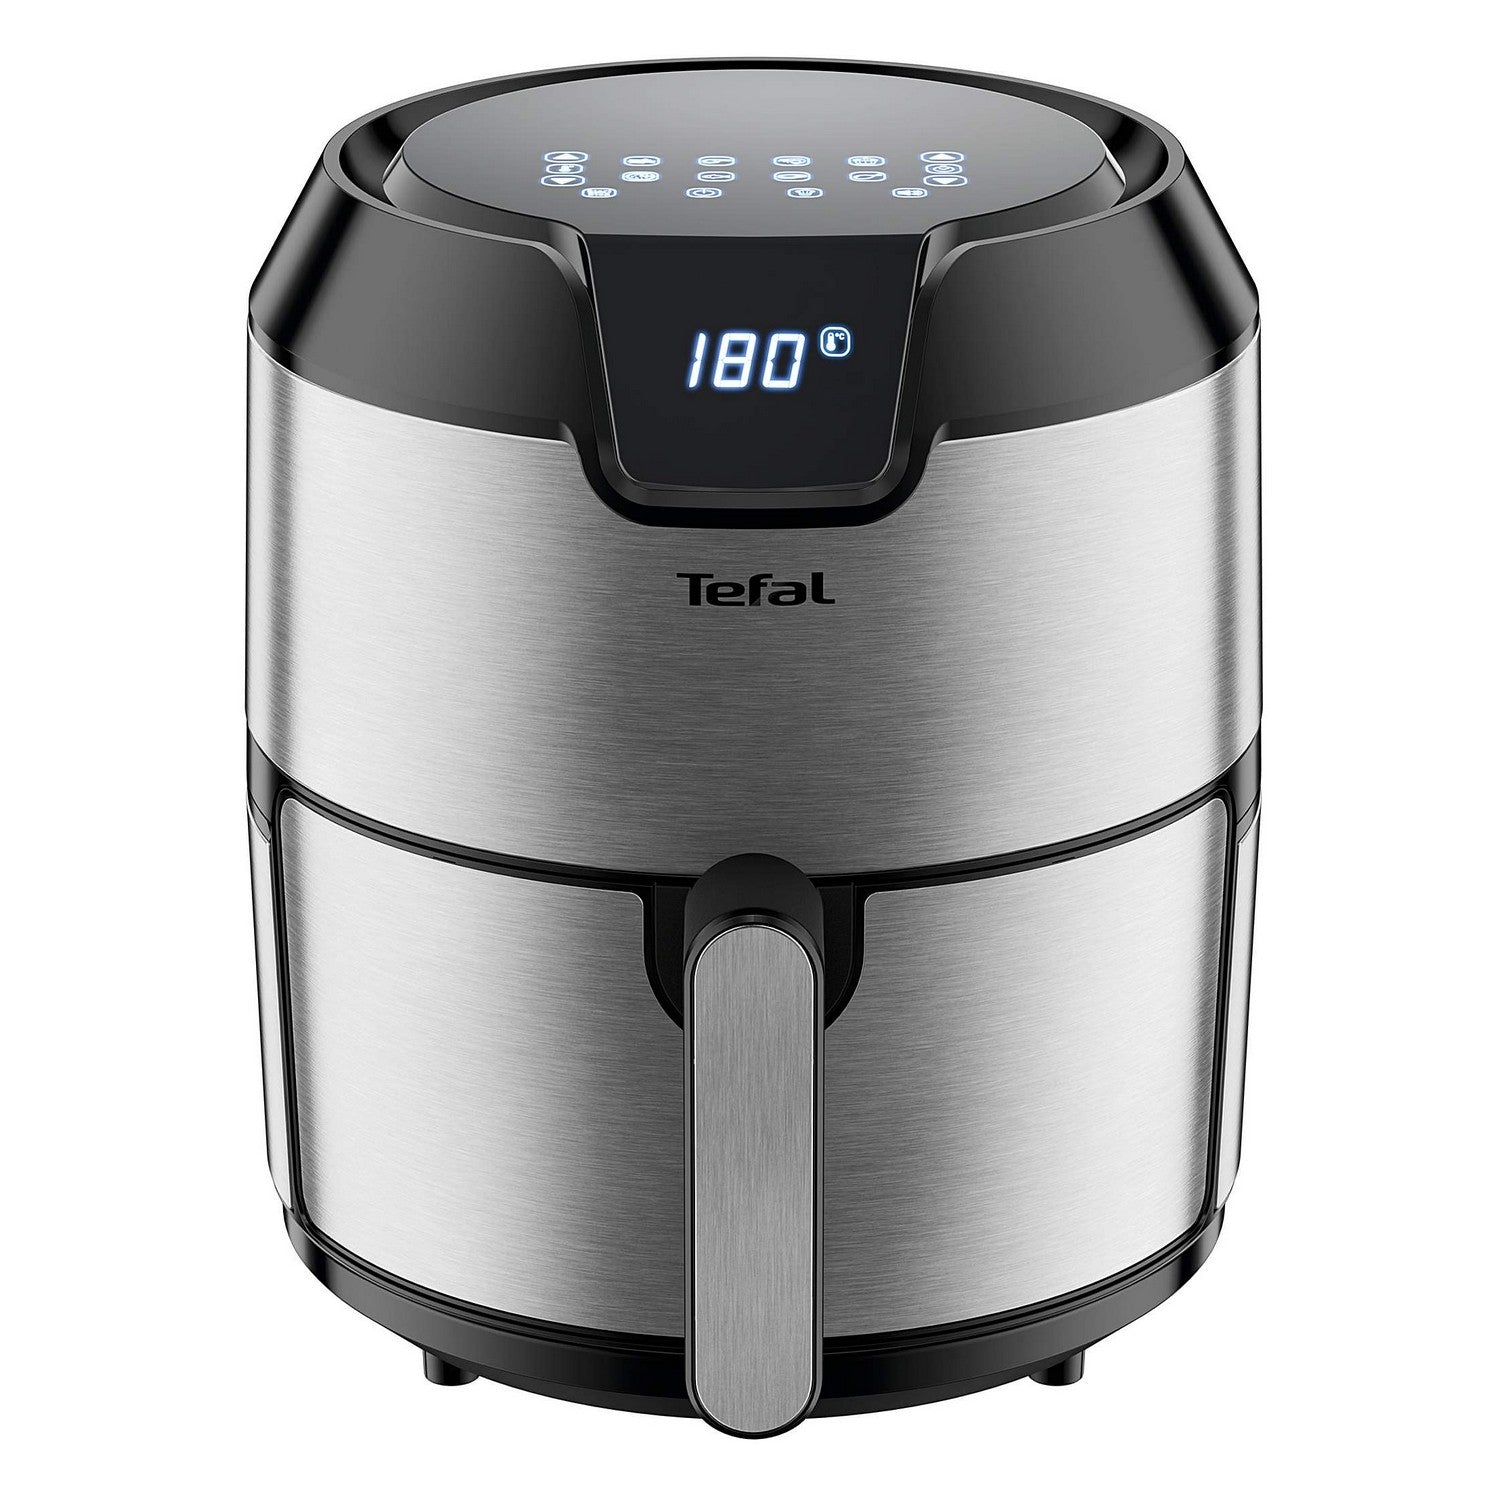 Tefal 4.2 Litre Easy Fry Deluxe Compact Air Fryer